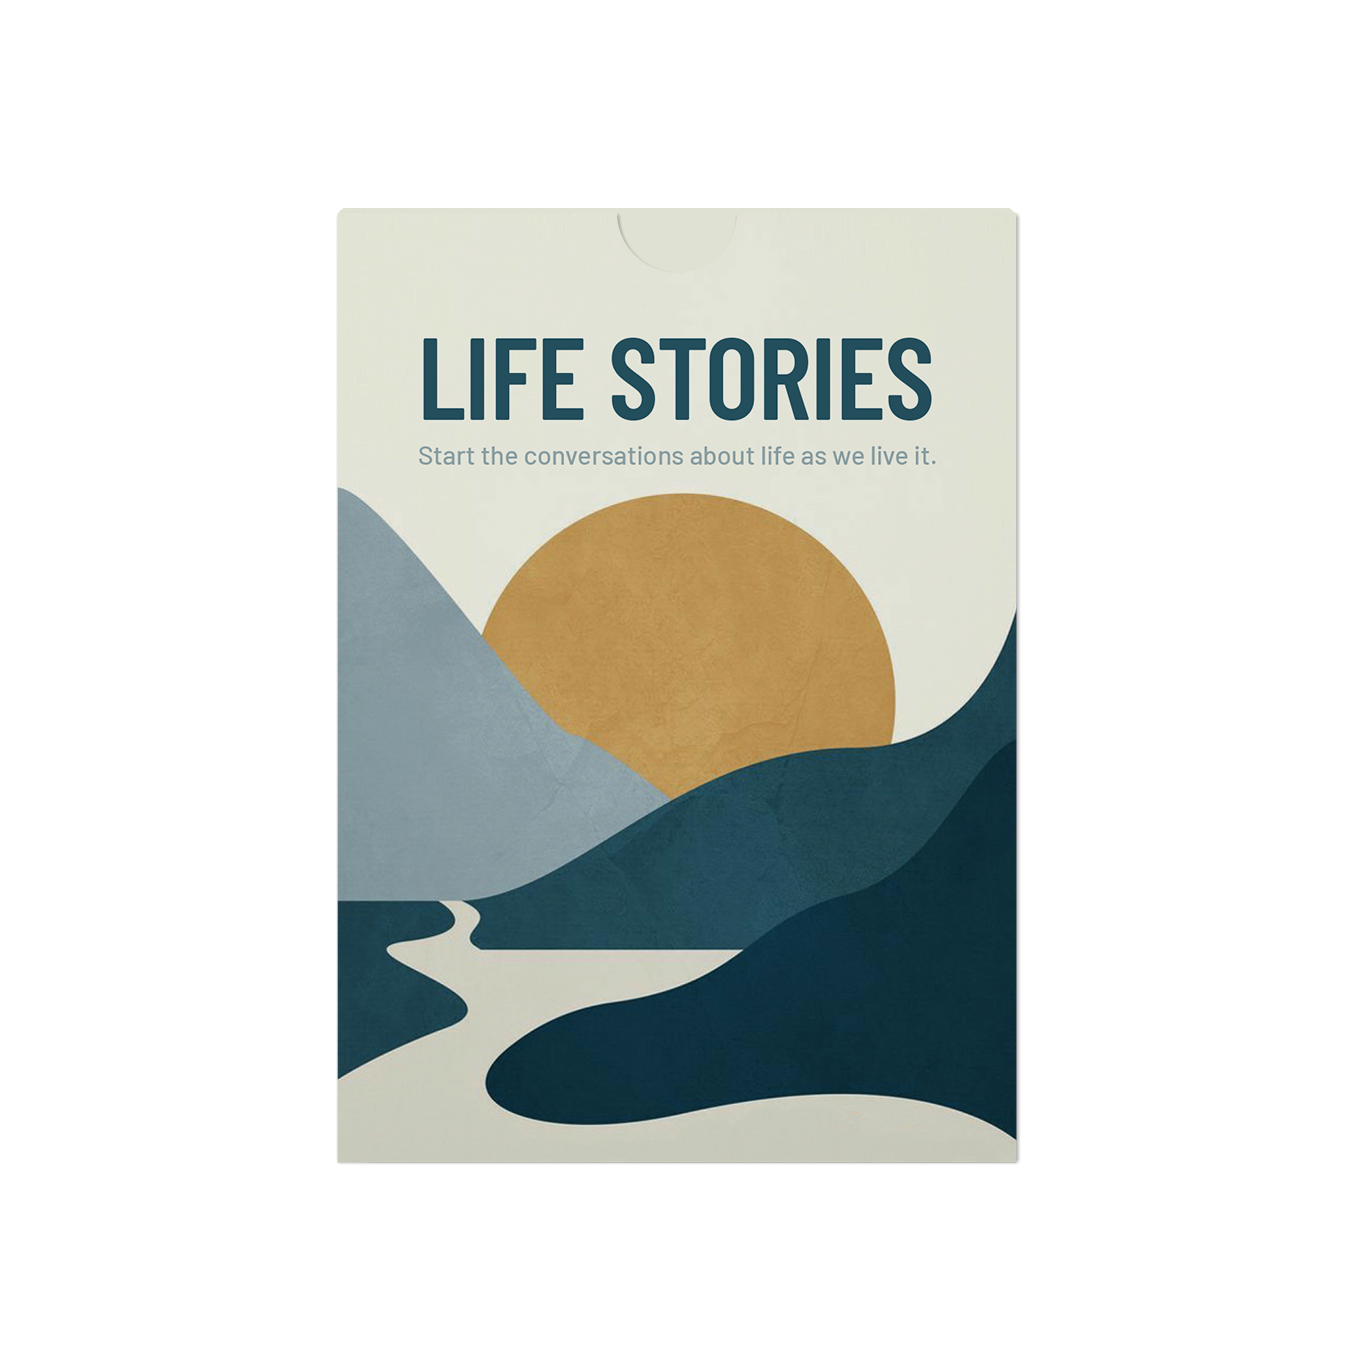 LIFE STORIES - Start the conversations about life as we live it.